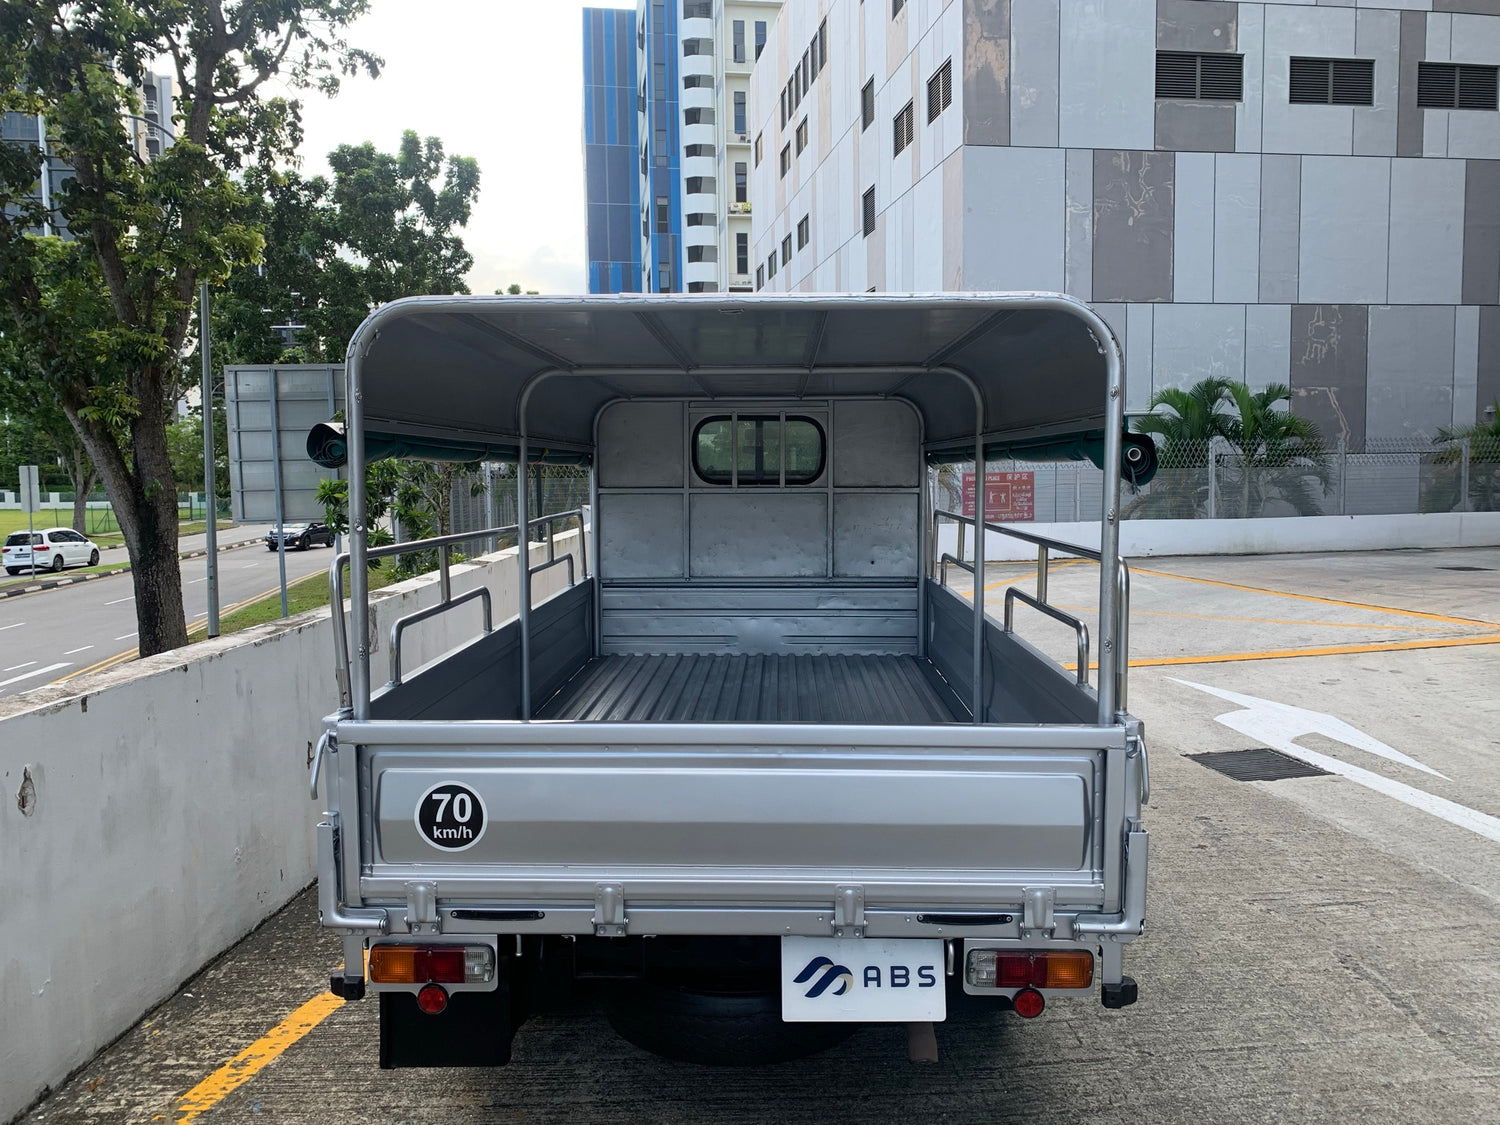 Toyota Dyna 3.0M with Full Canopy